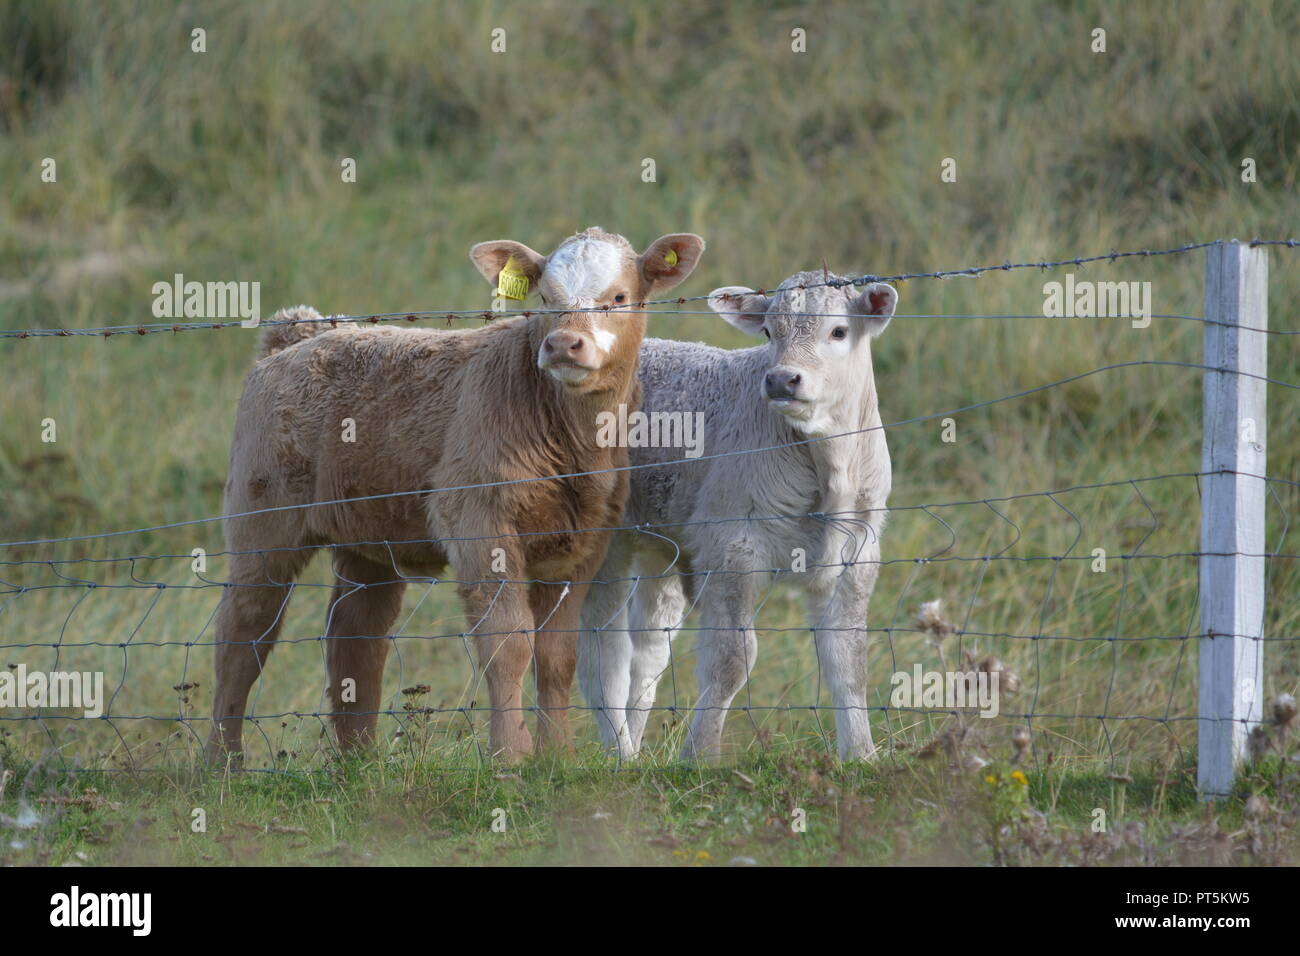 Close up of highland cattle young calf calves in a grassy field behind barbed wire fence near Tarbert on the Isle of Harris Outer Hebrides Scotland UK Stock Photo